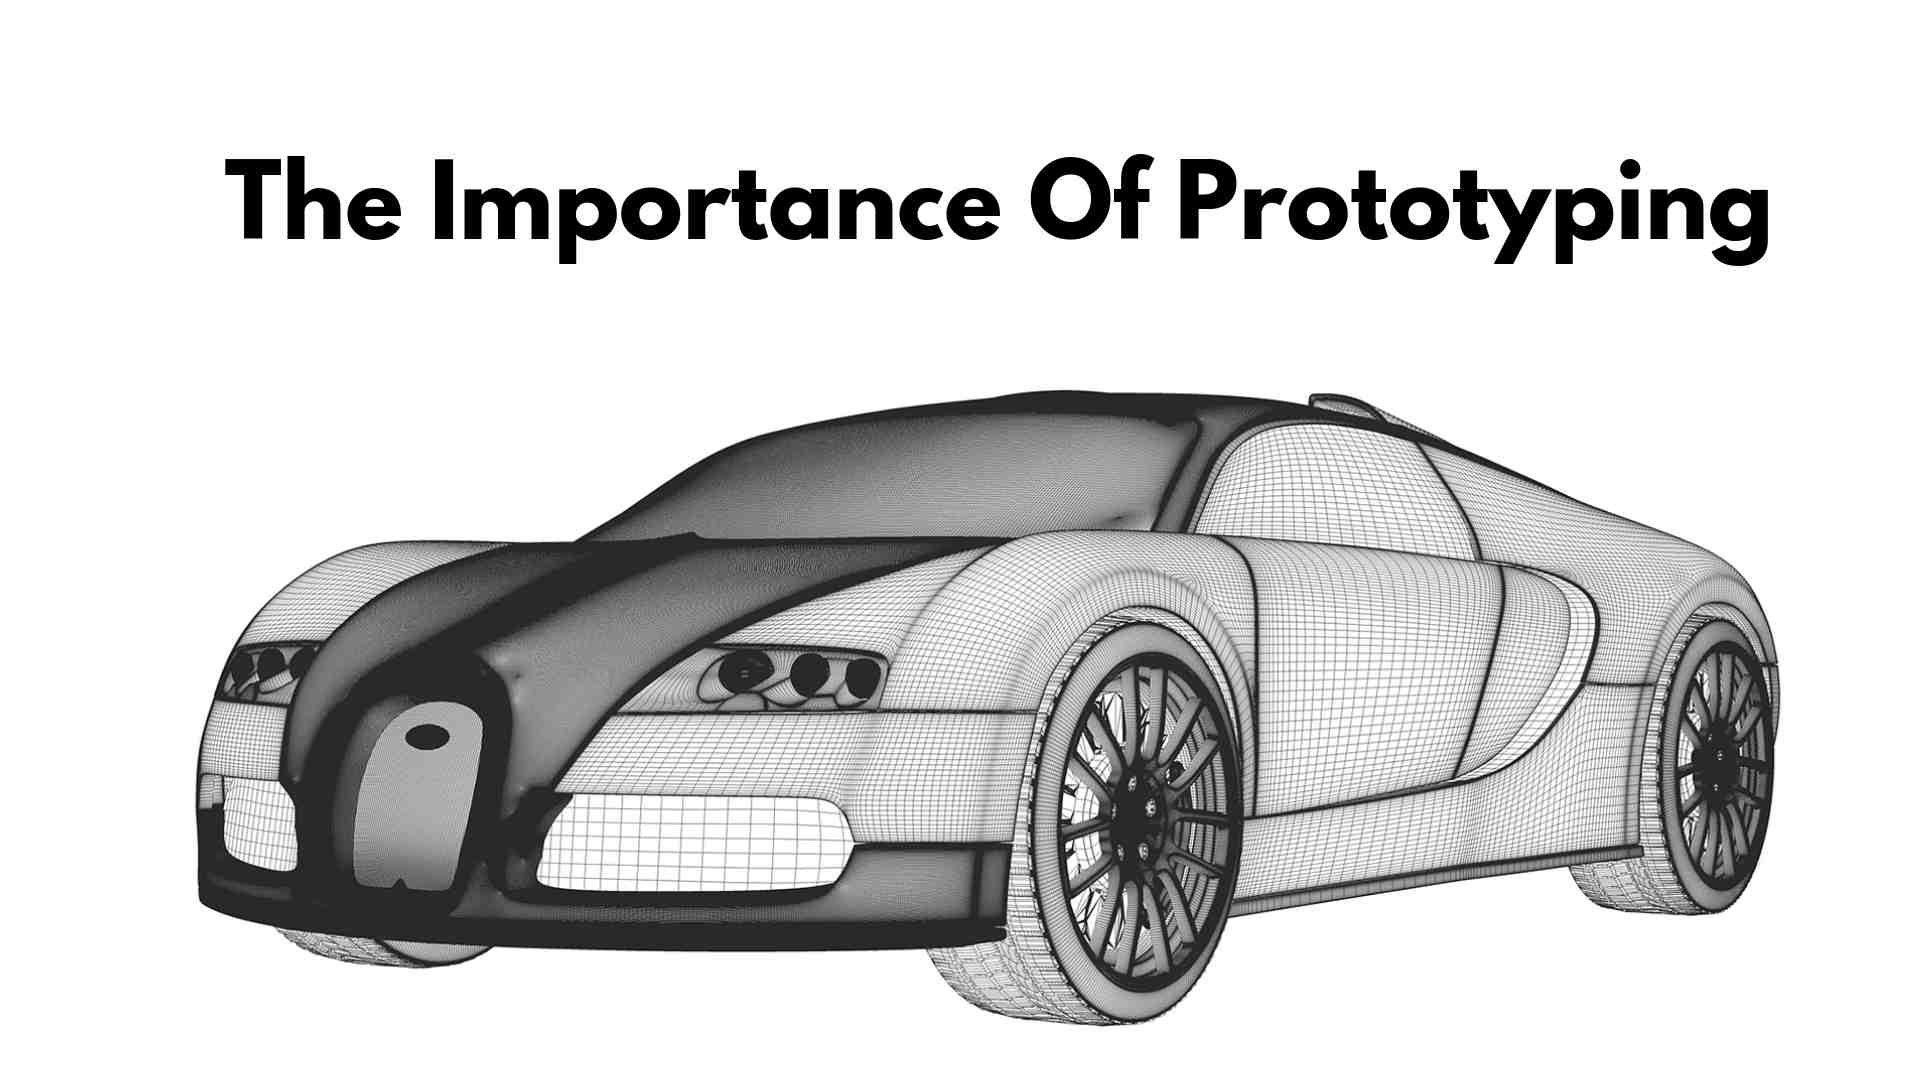 The Importance Of Prototyping